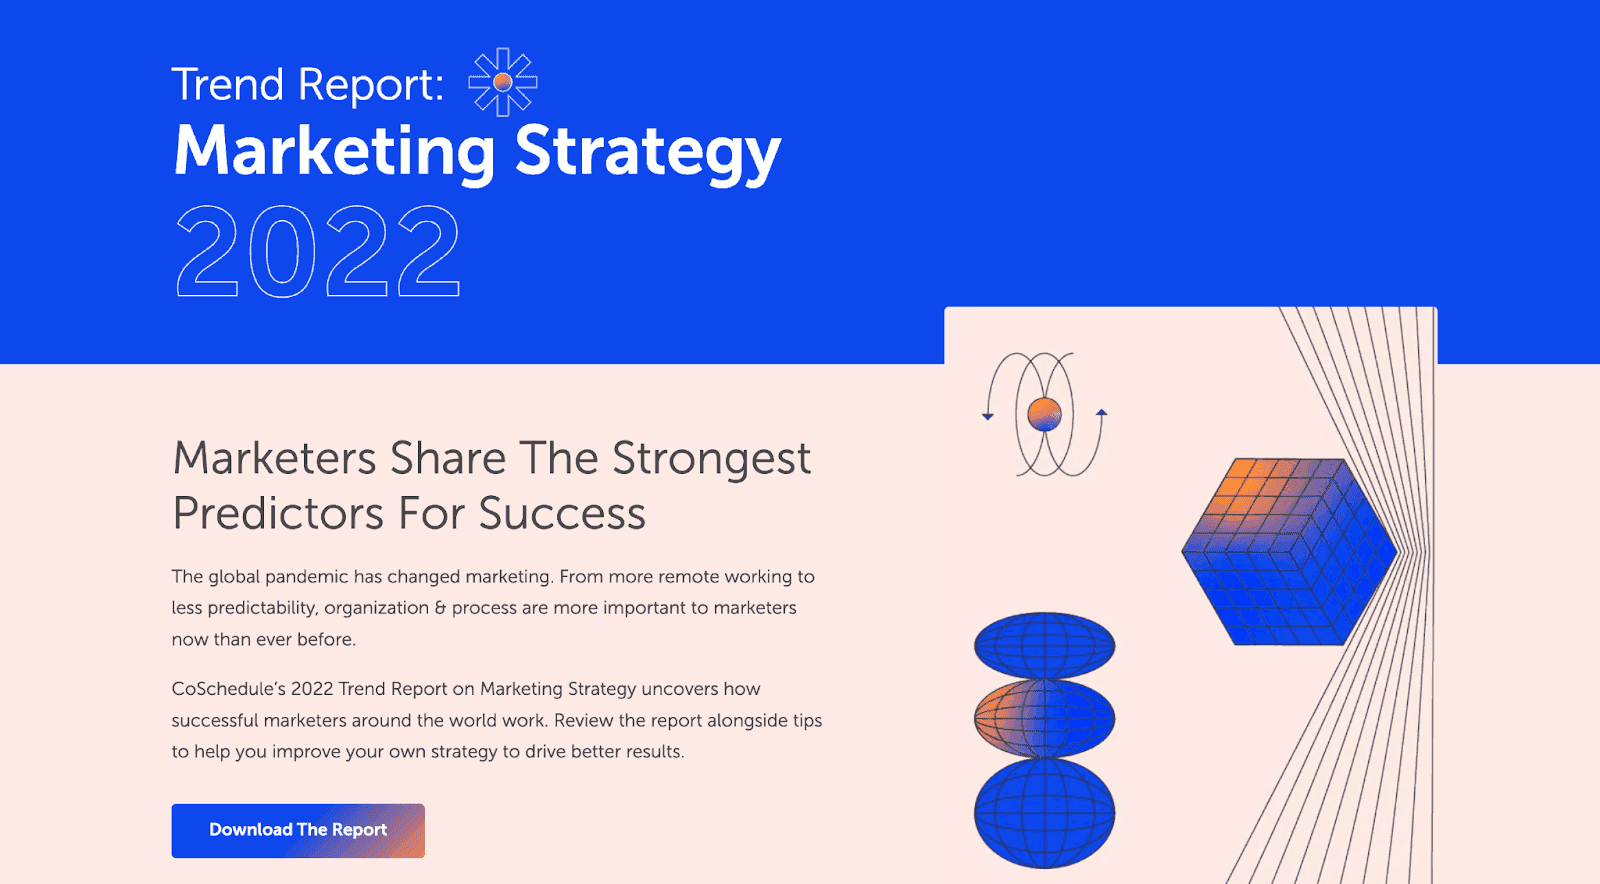 2022 Trend report for marketing strategy